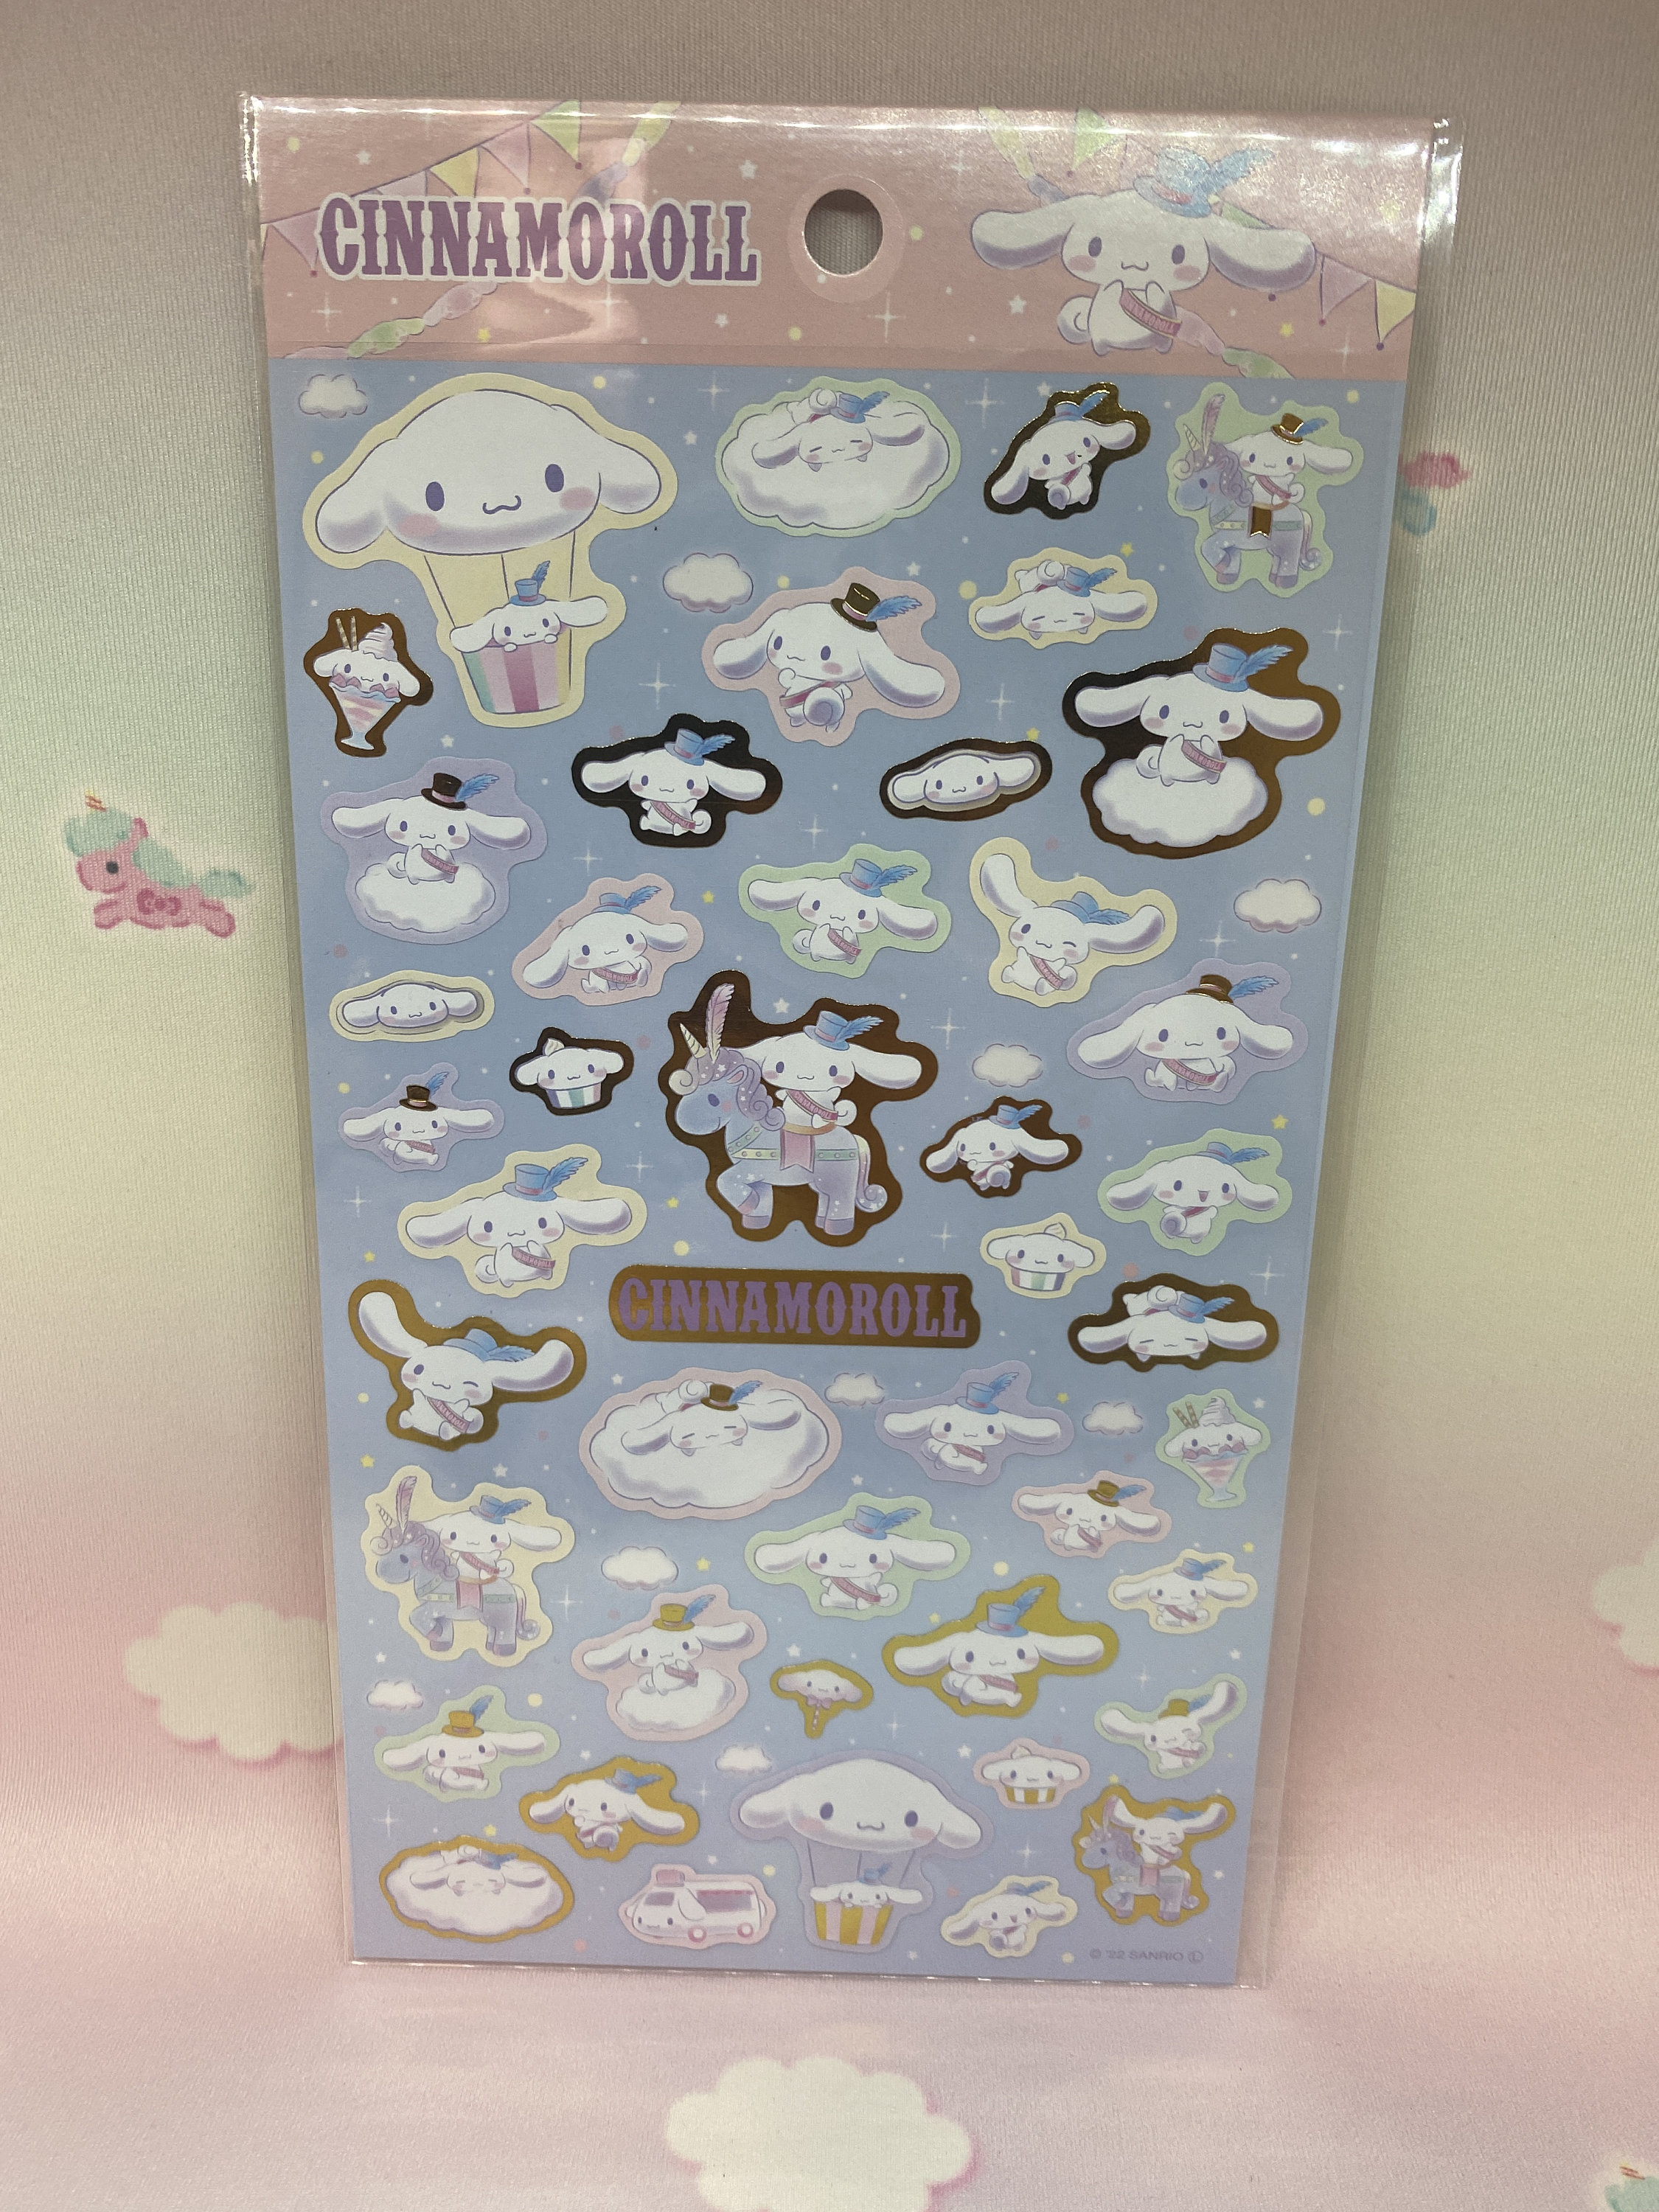 2022 Large Cinnamoroll and Hangyodon Sticker Sheet pick One 